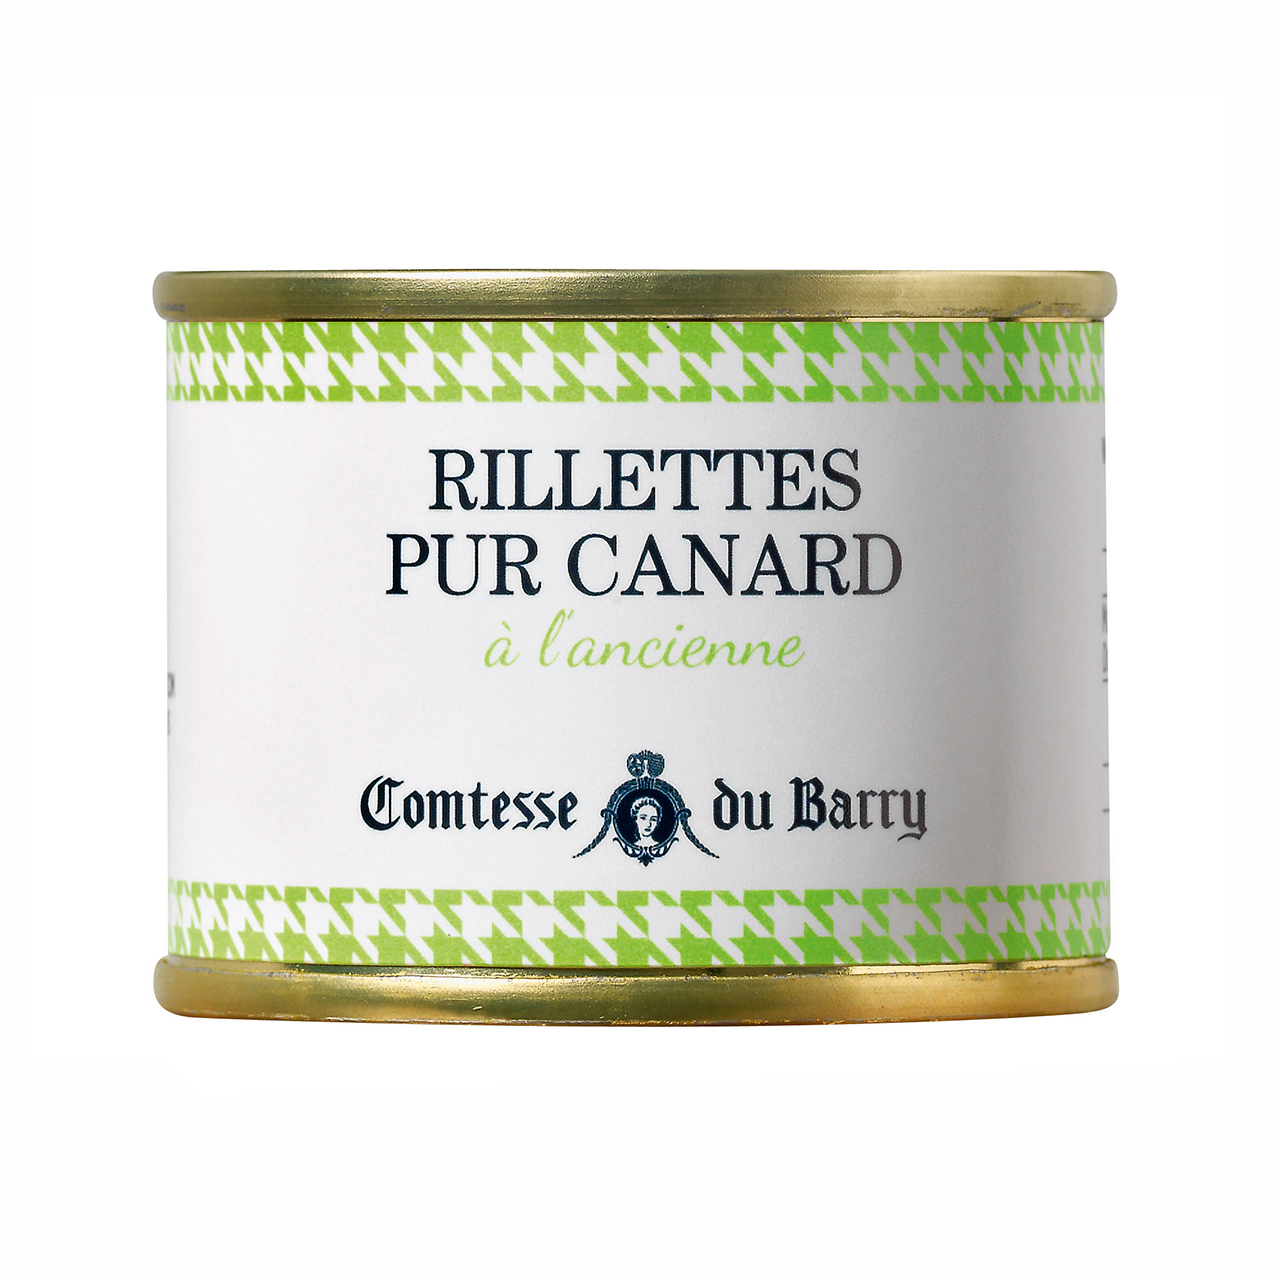 Traditional Duck rillettes